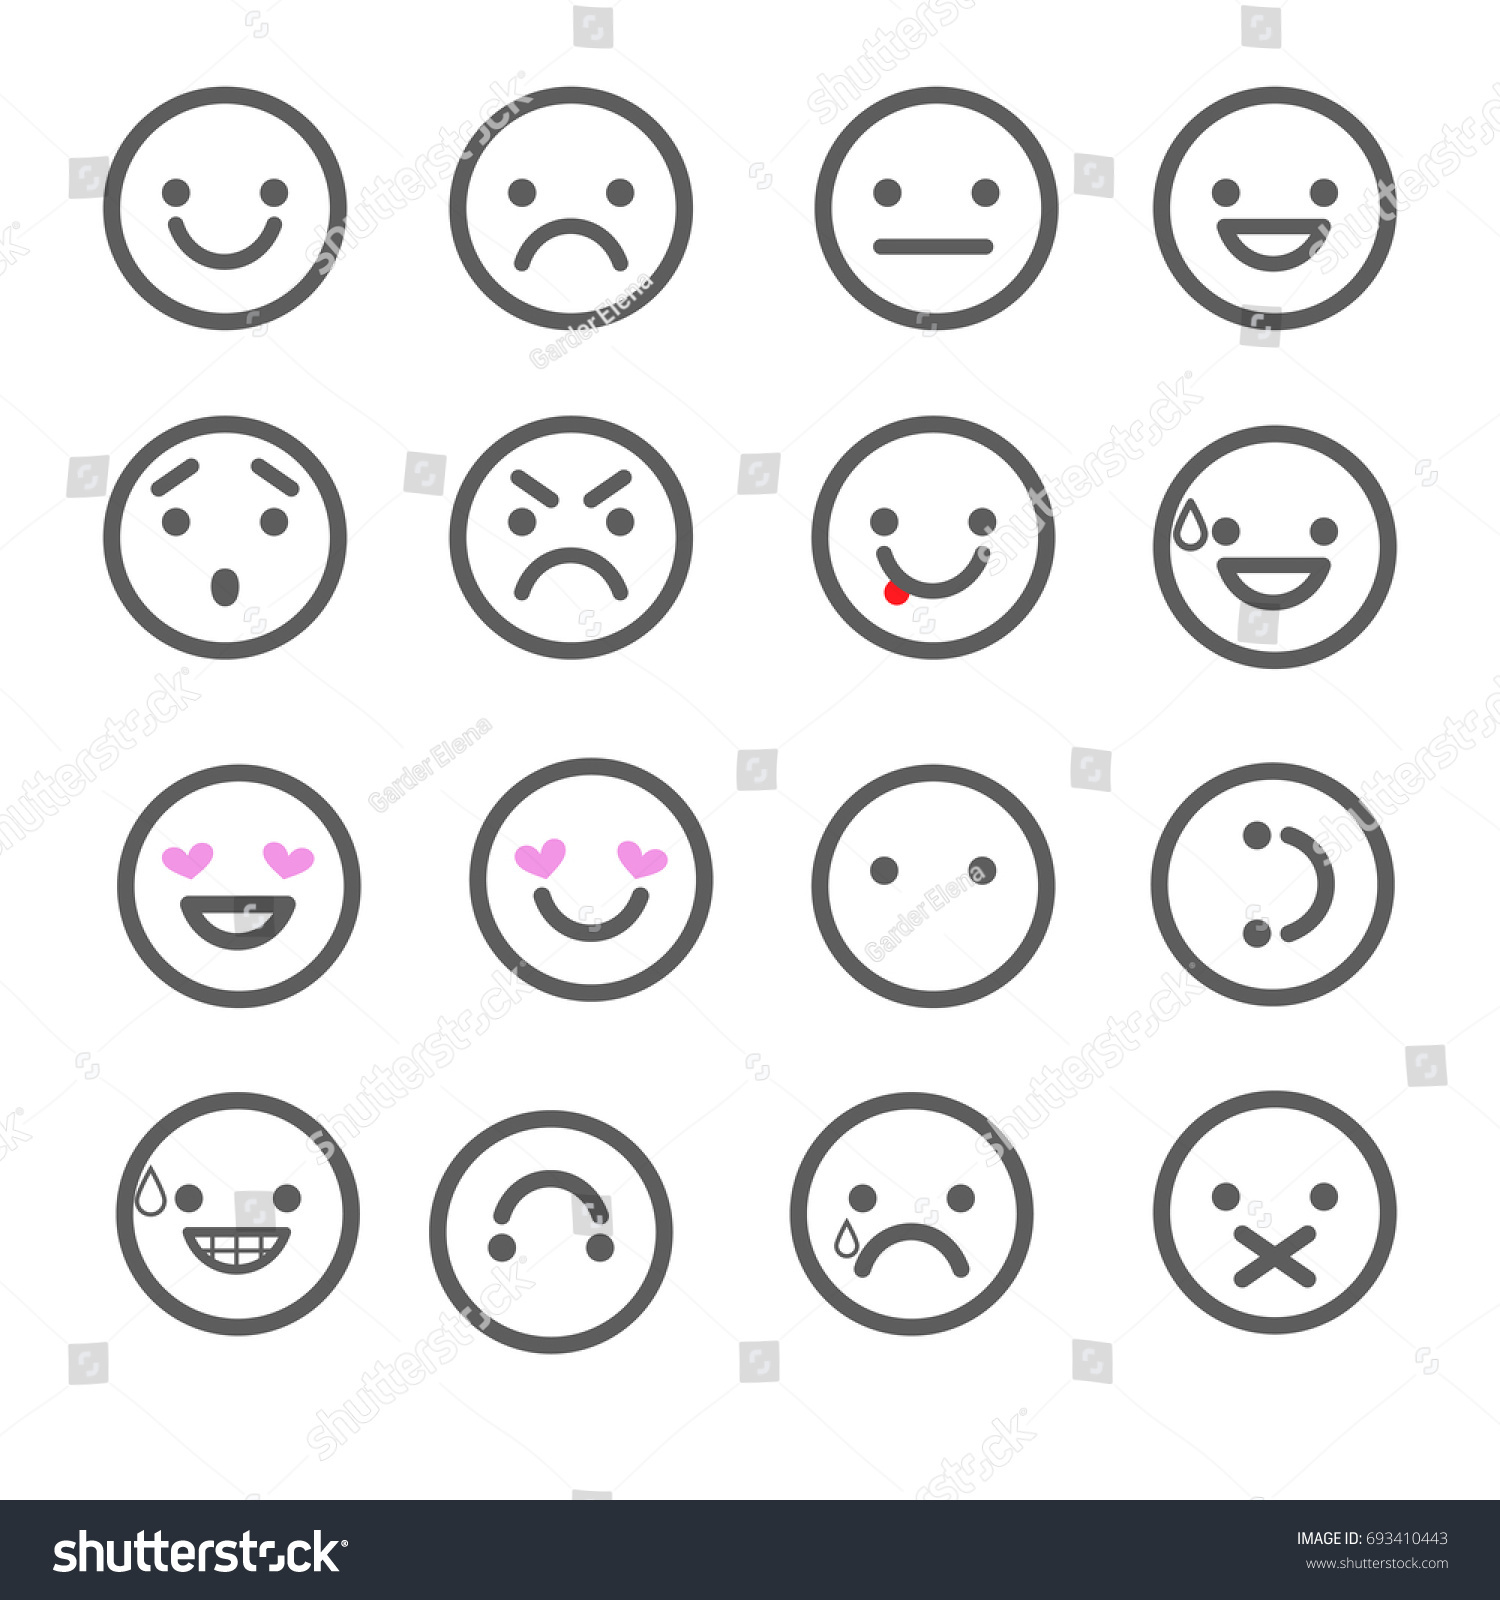 Faces chat chat